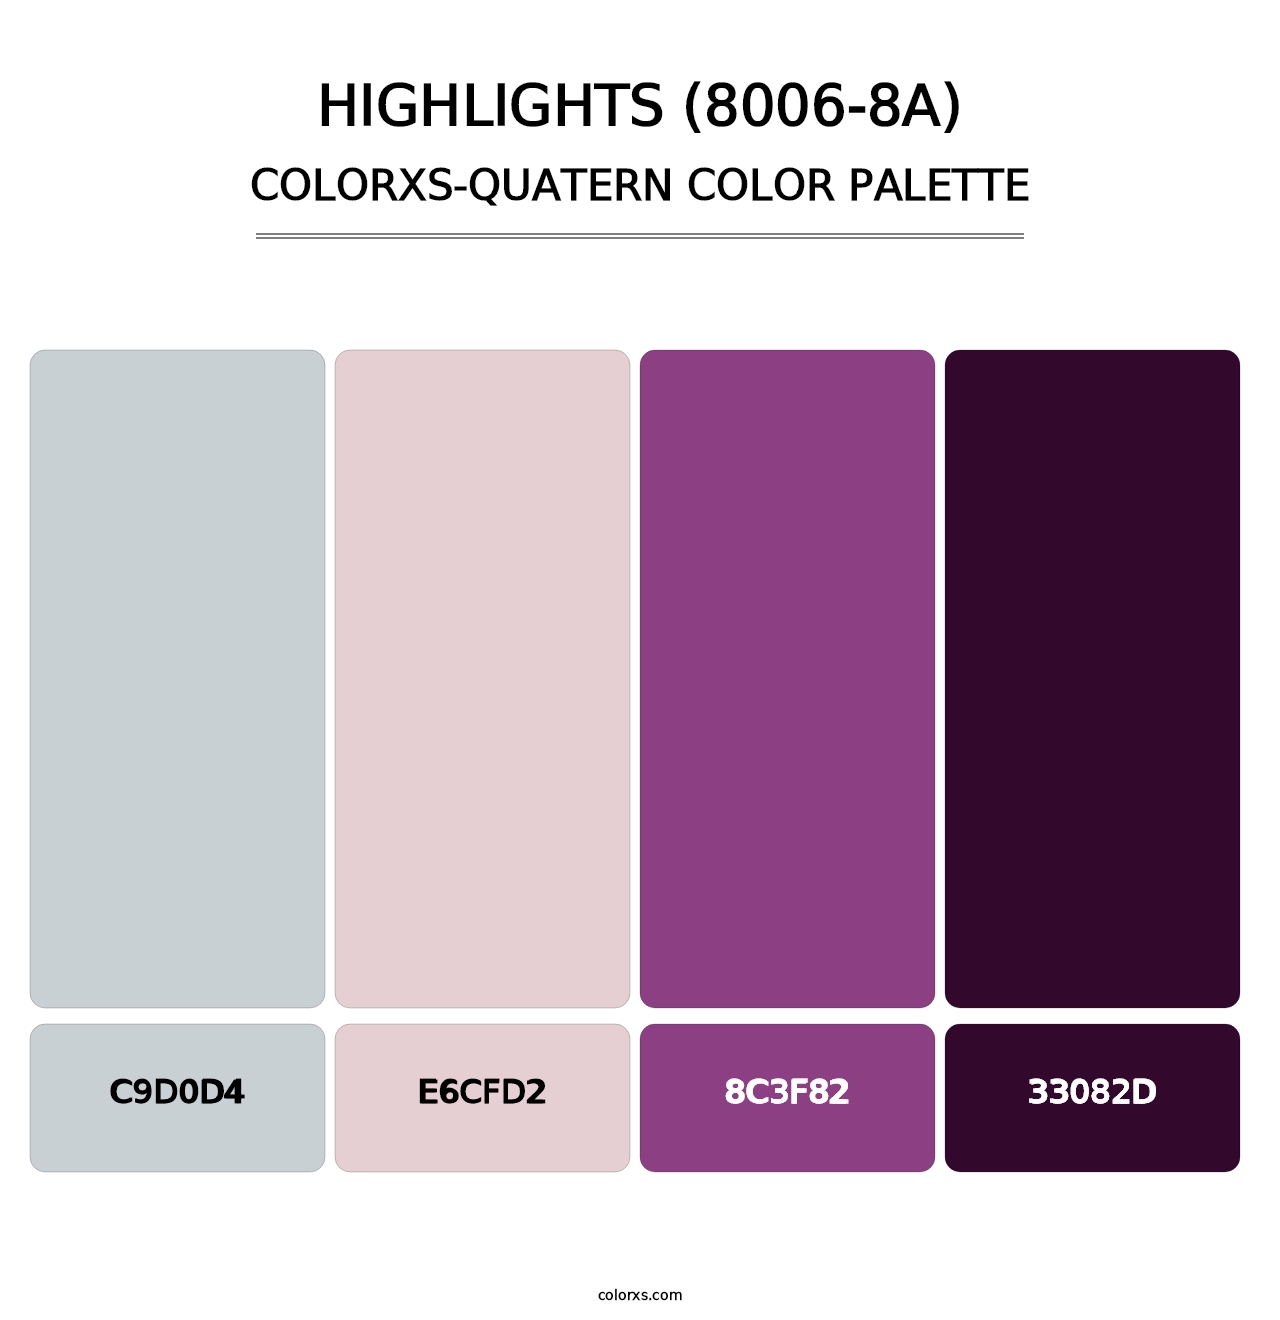 Highlights (8006-8A) - Colorxs Quatern Palette